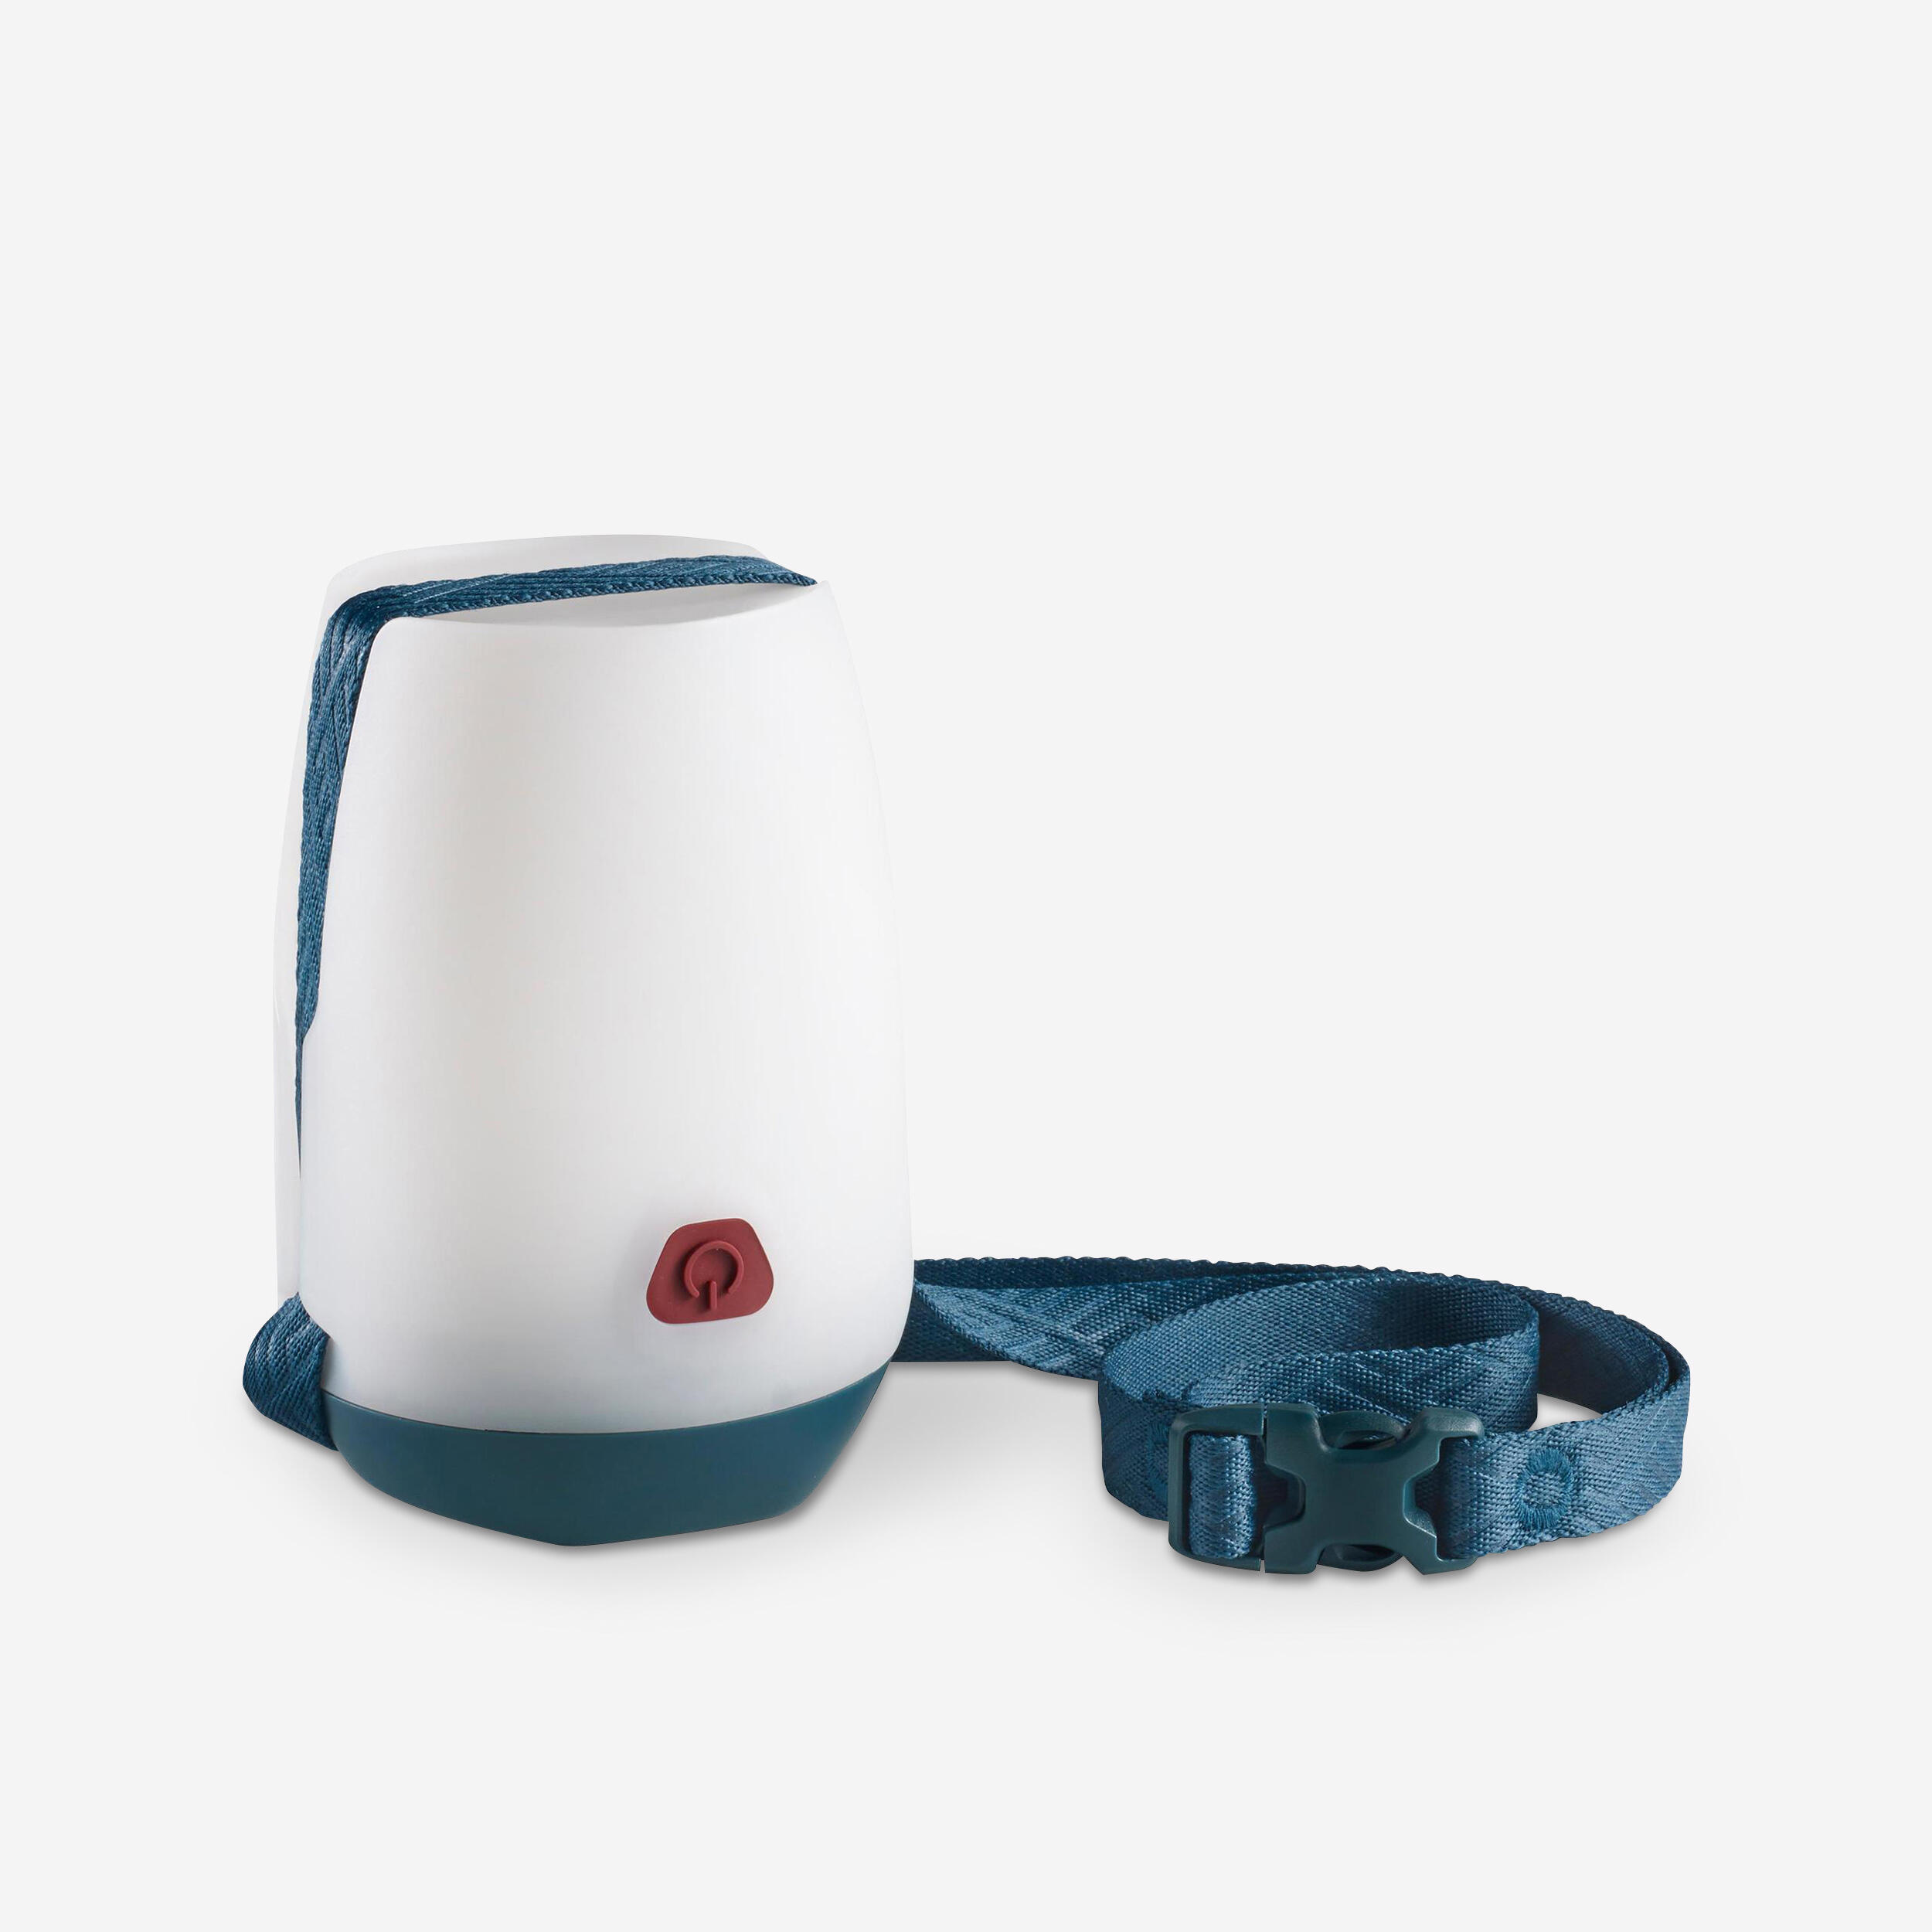 Camping Lamp - BL 100 Blue